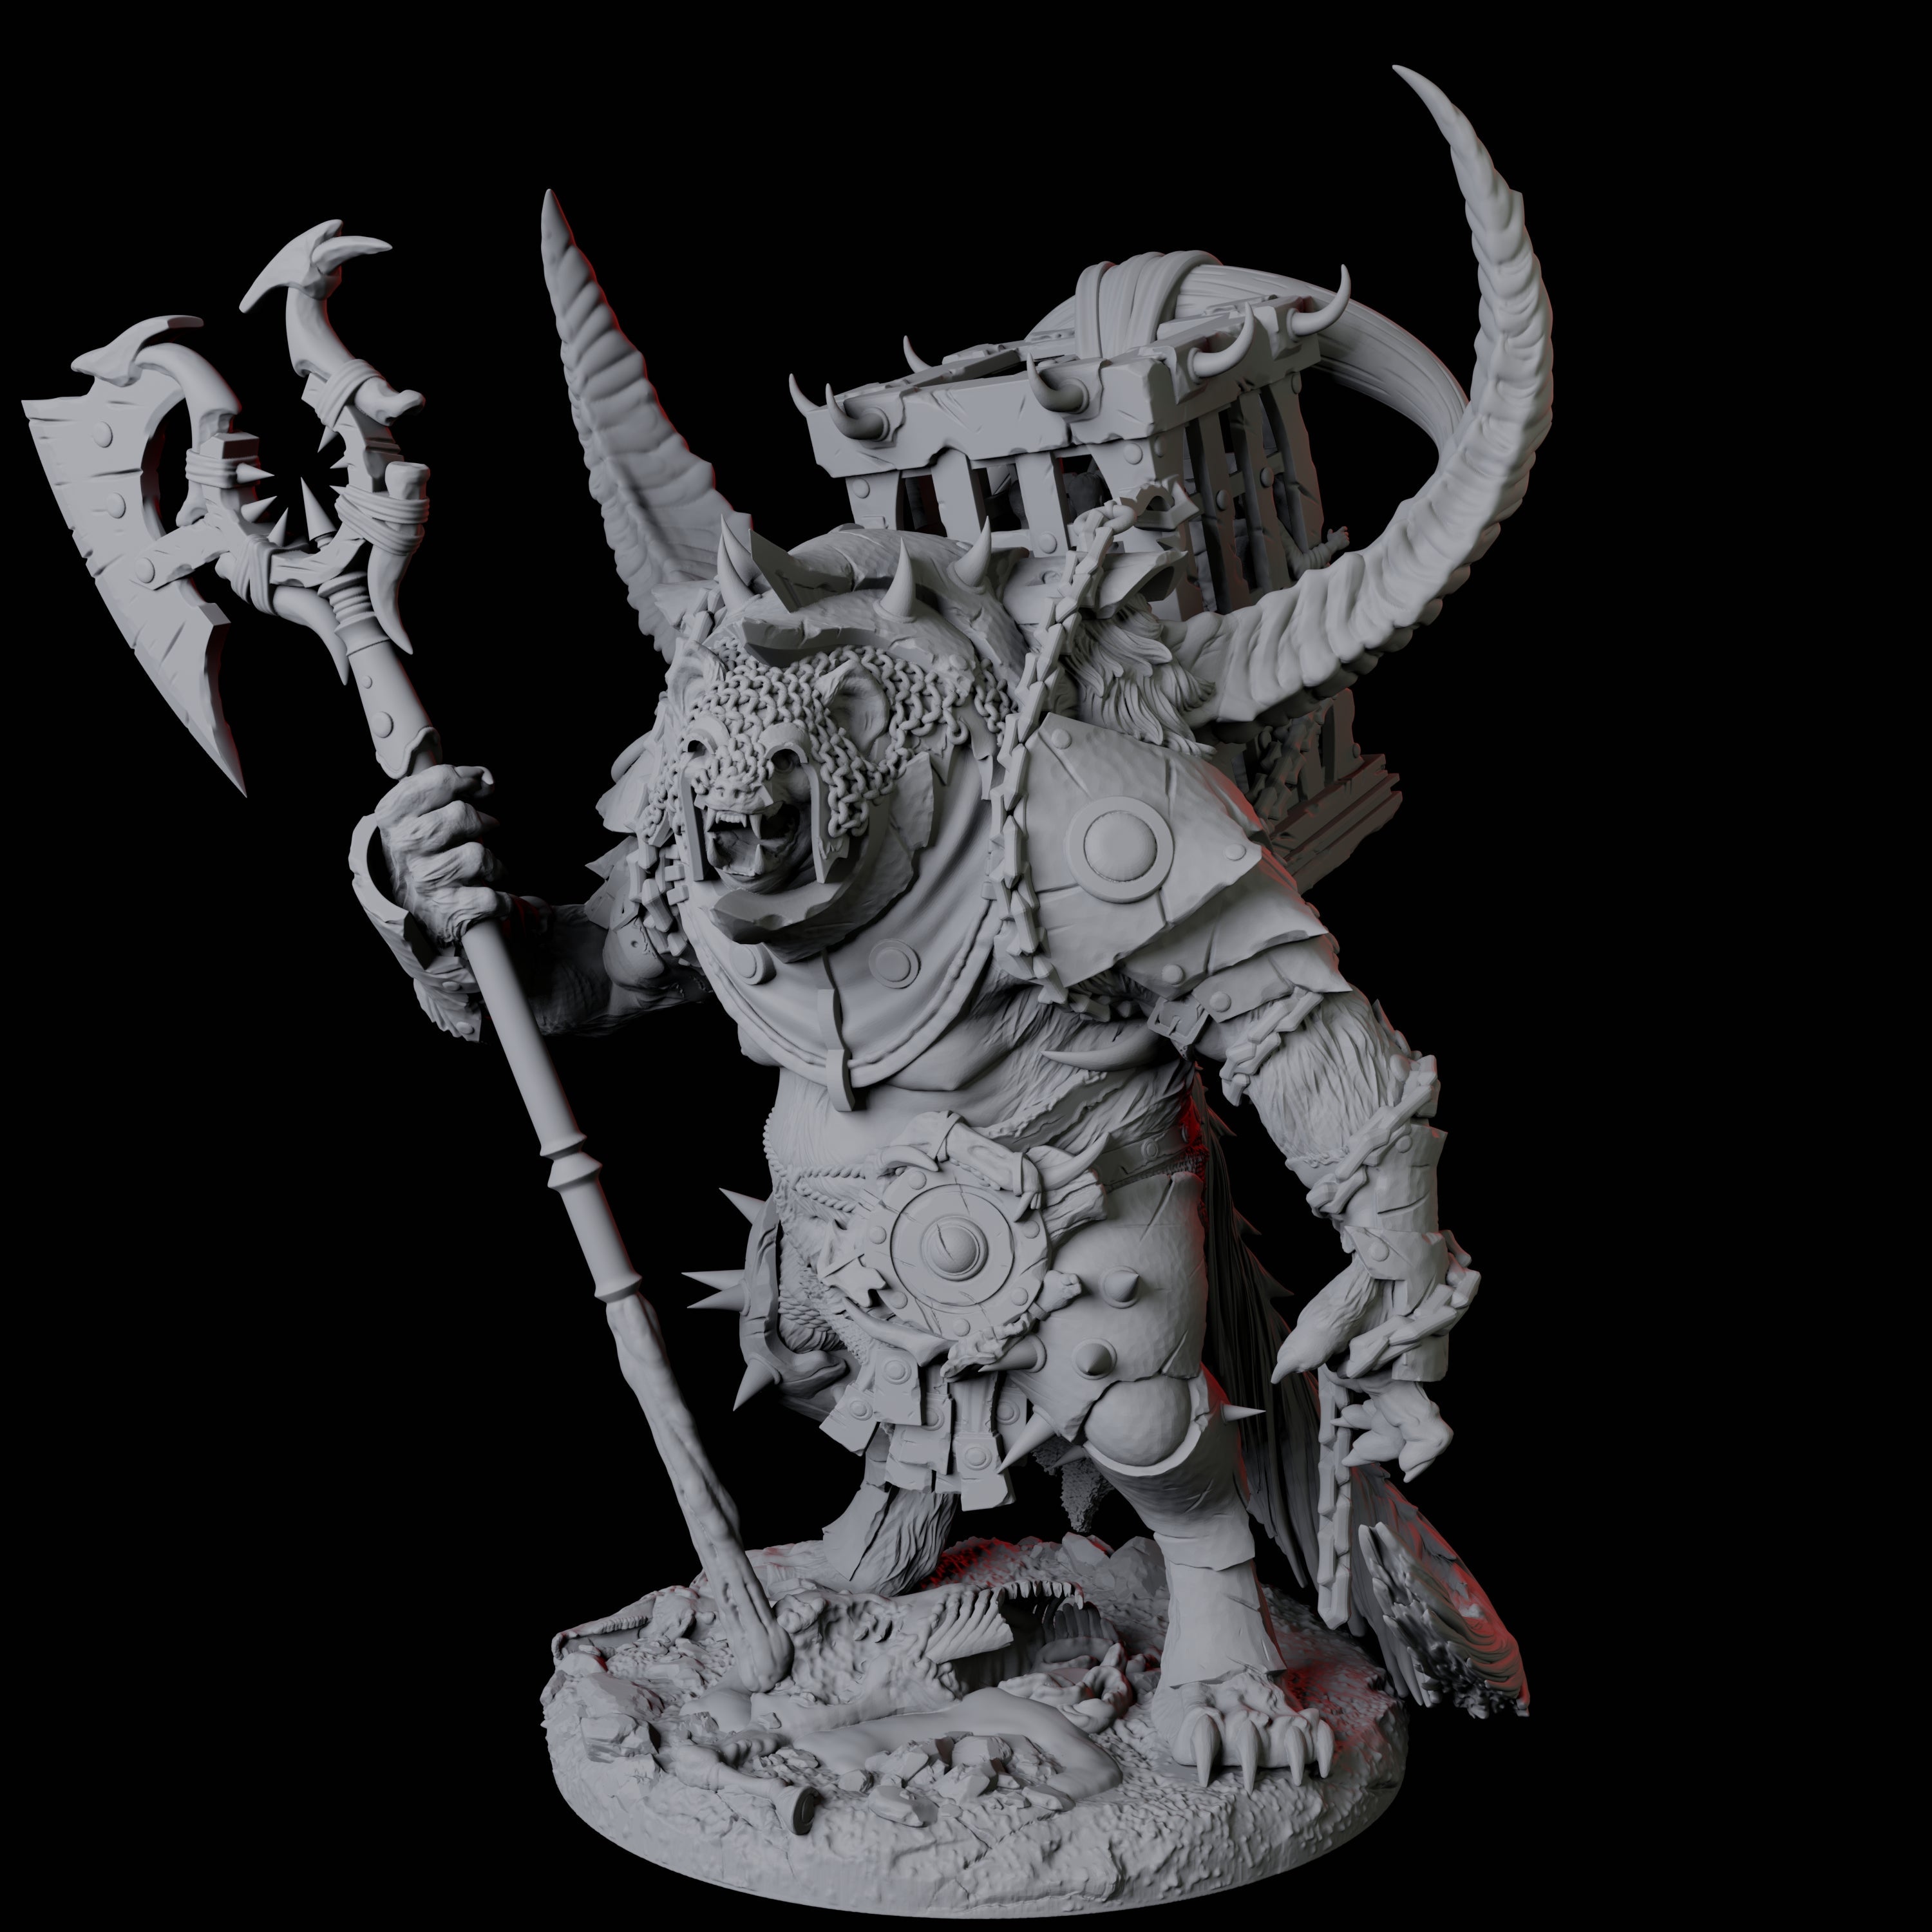 Gnoll Jailer Miniature for Dungeons and Dragons, Pathfinder or other TTRPGs